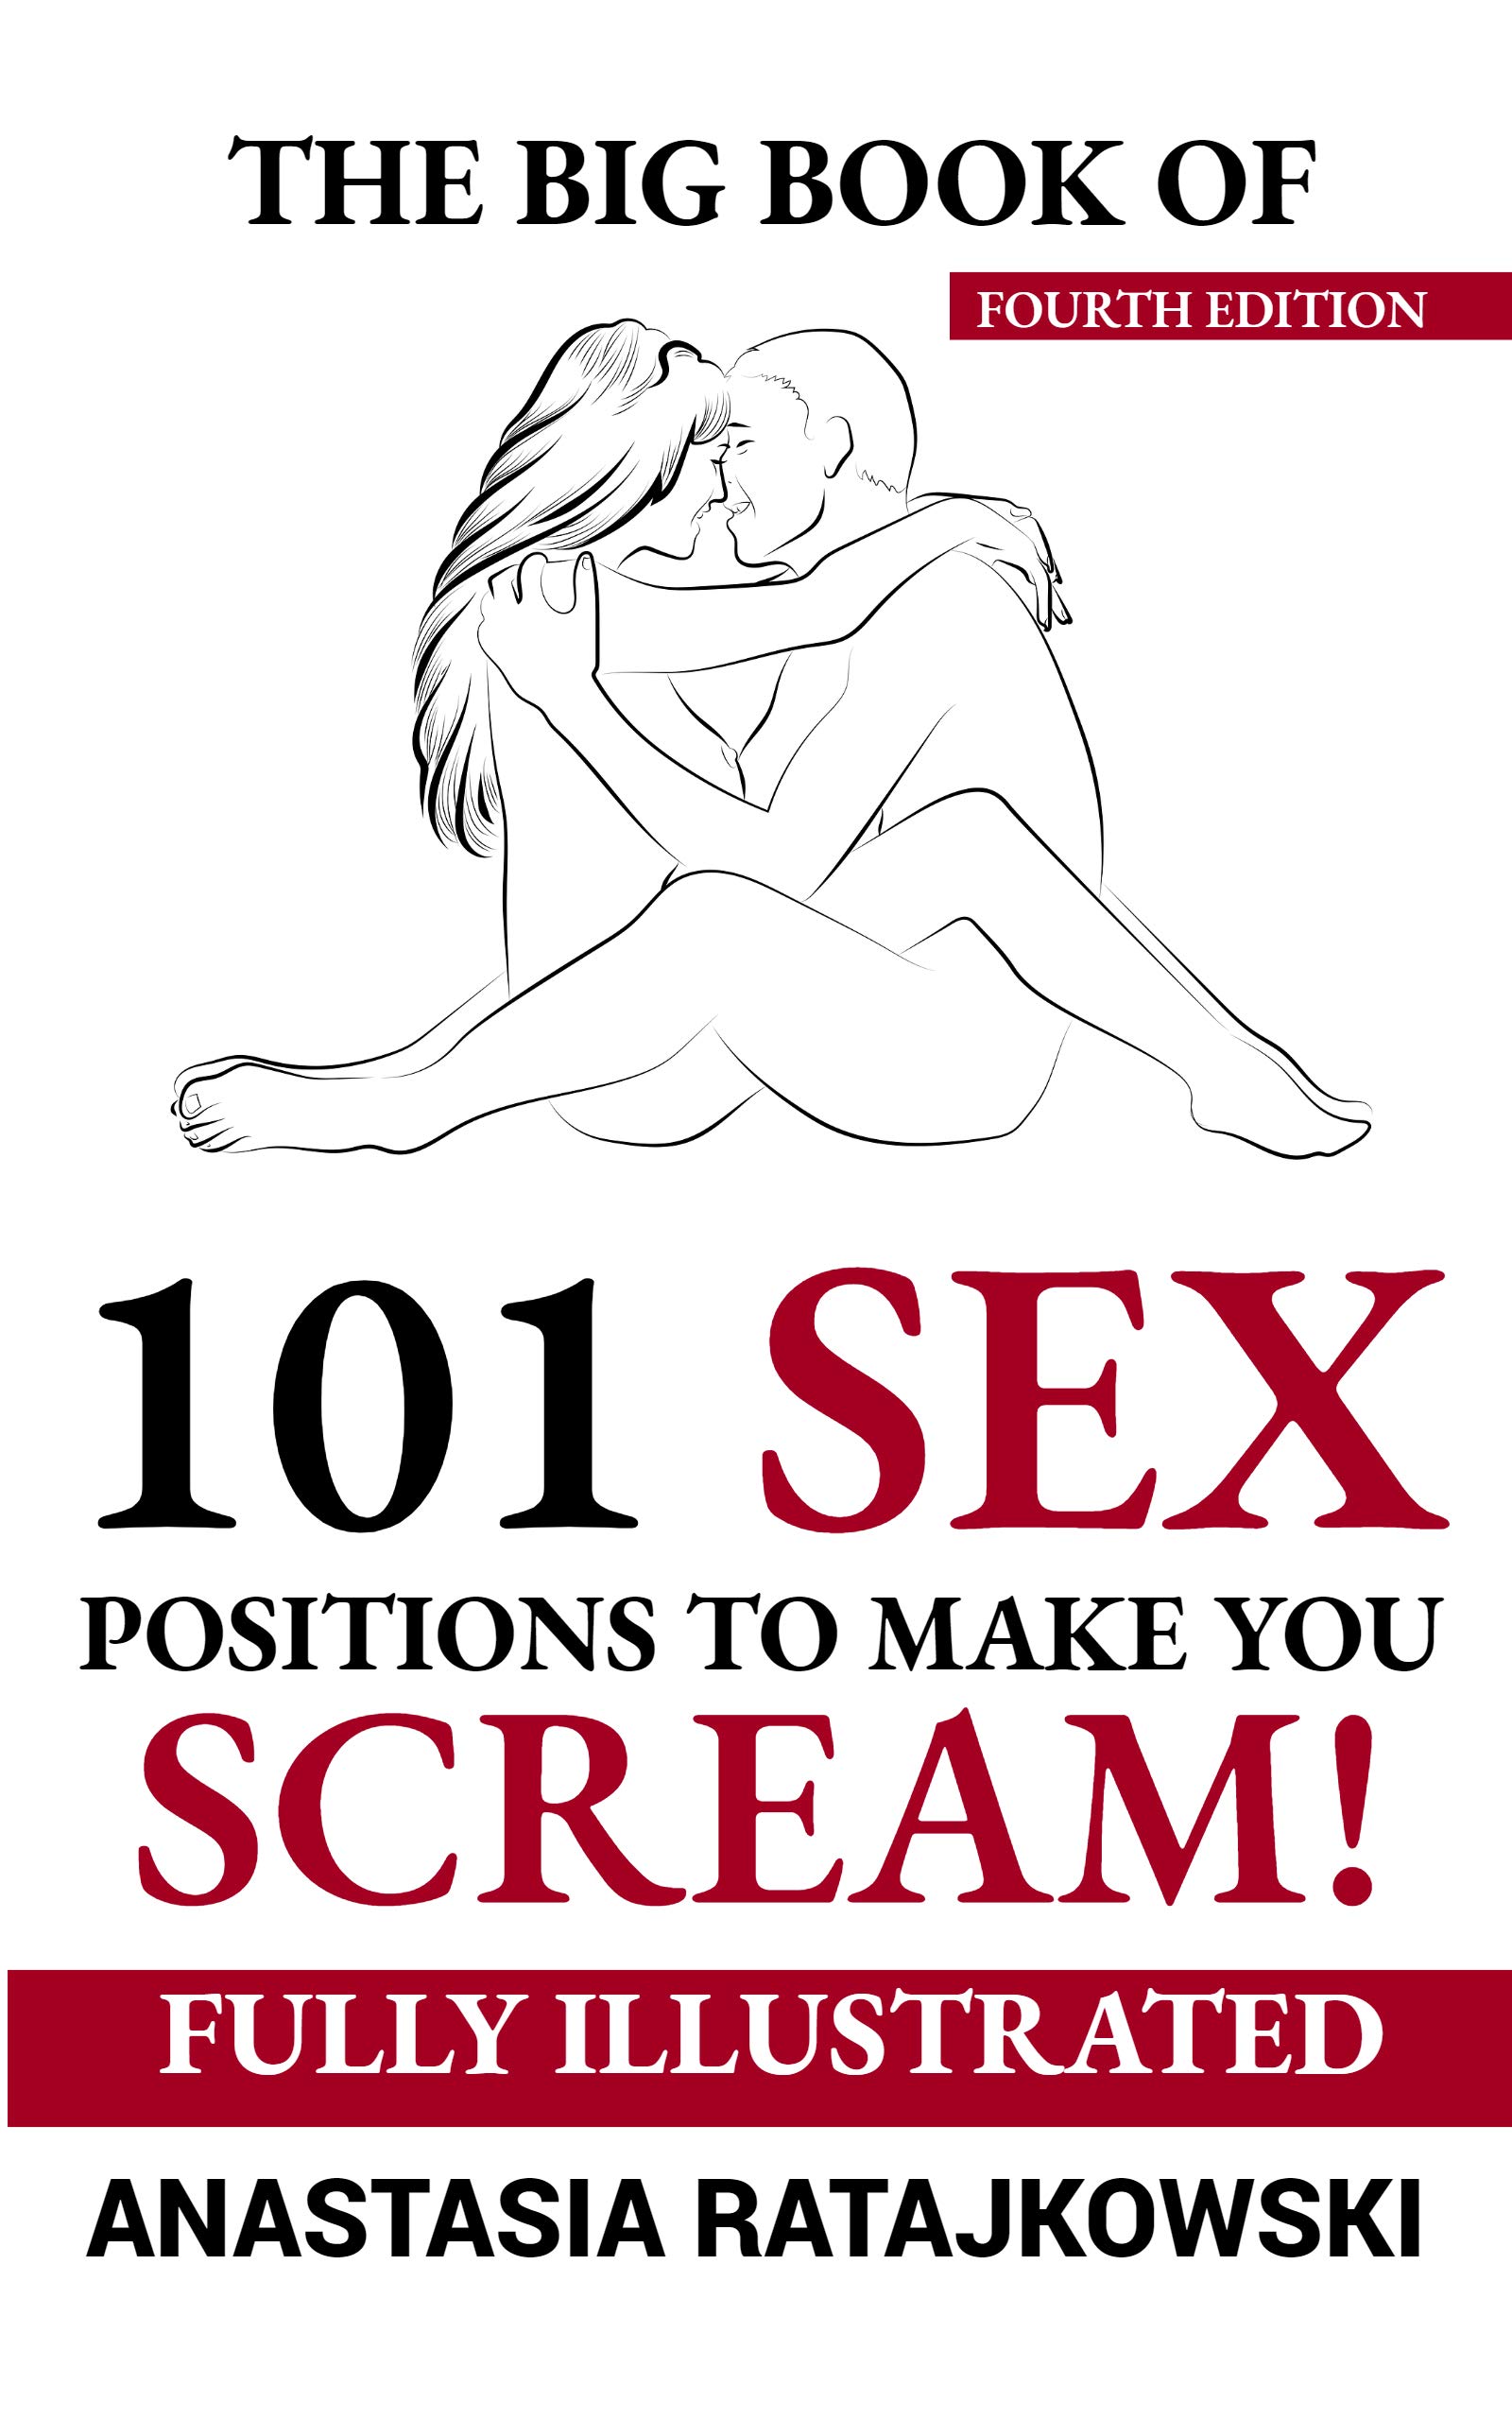 celeste trahan recommends 101 sexual positions pdf pic